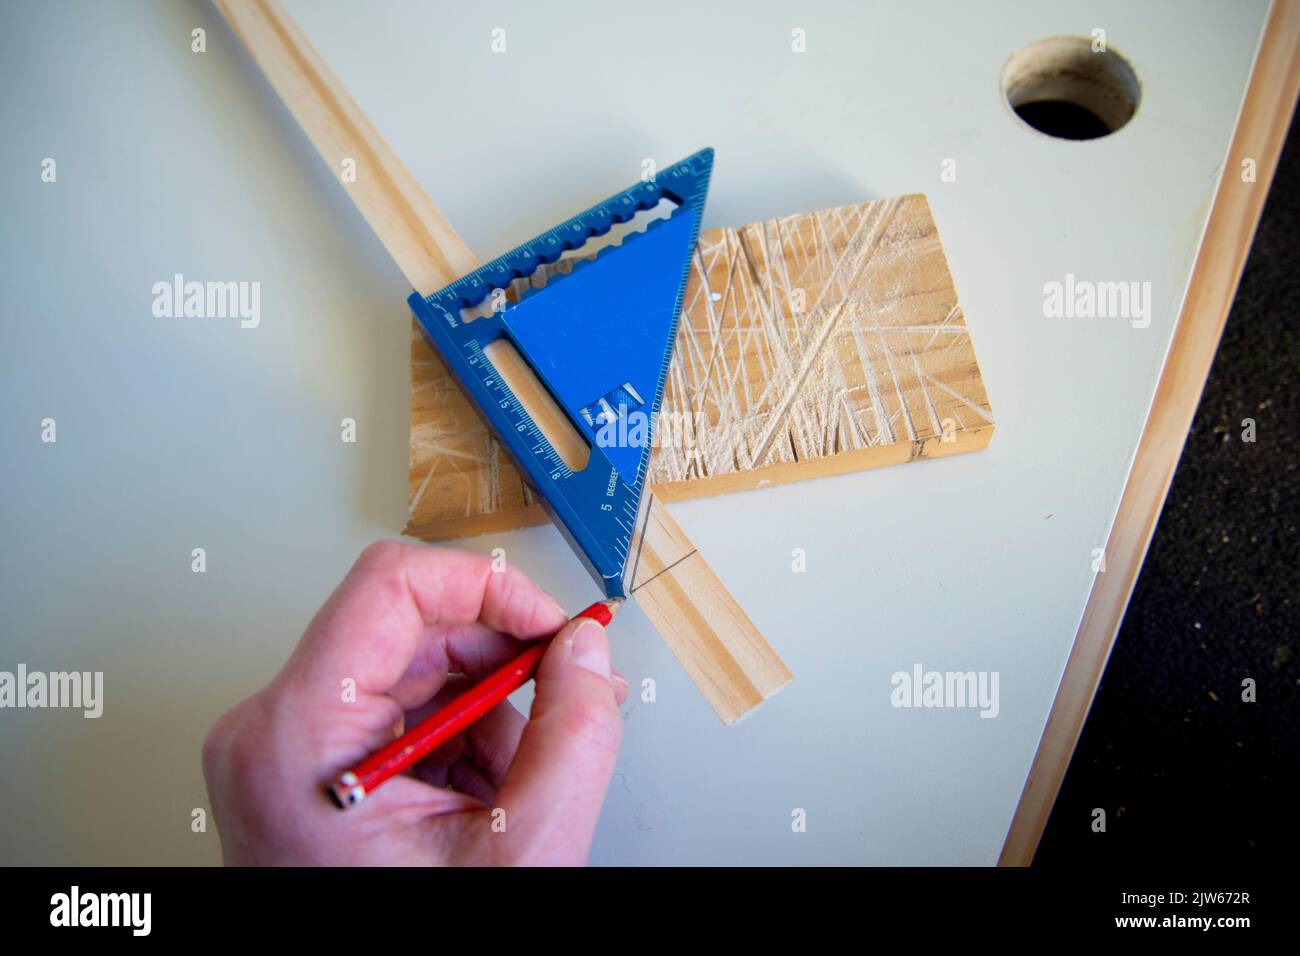 DIY Construction with a Rafter Square Stock Photo